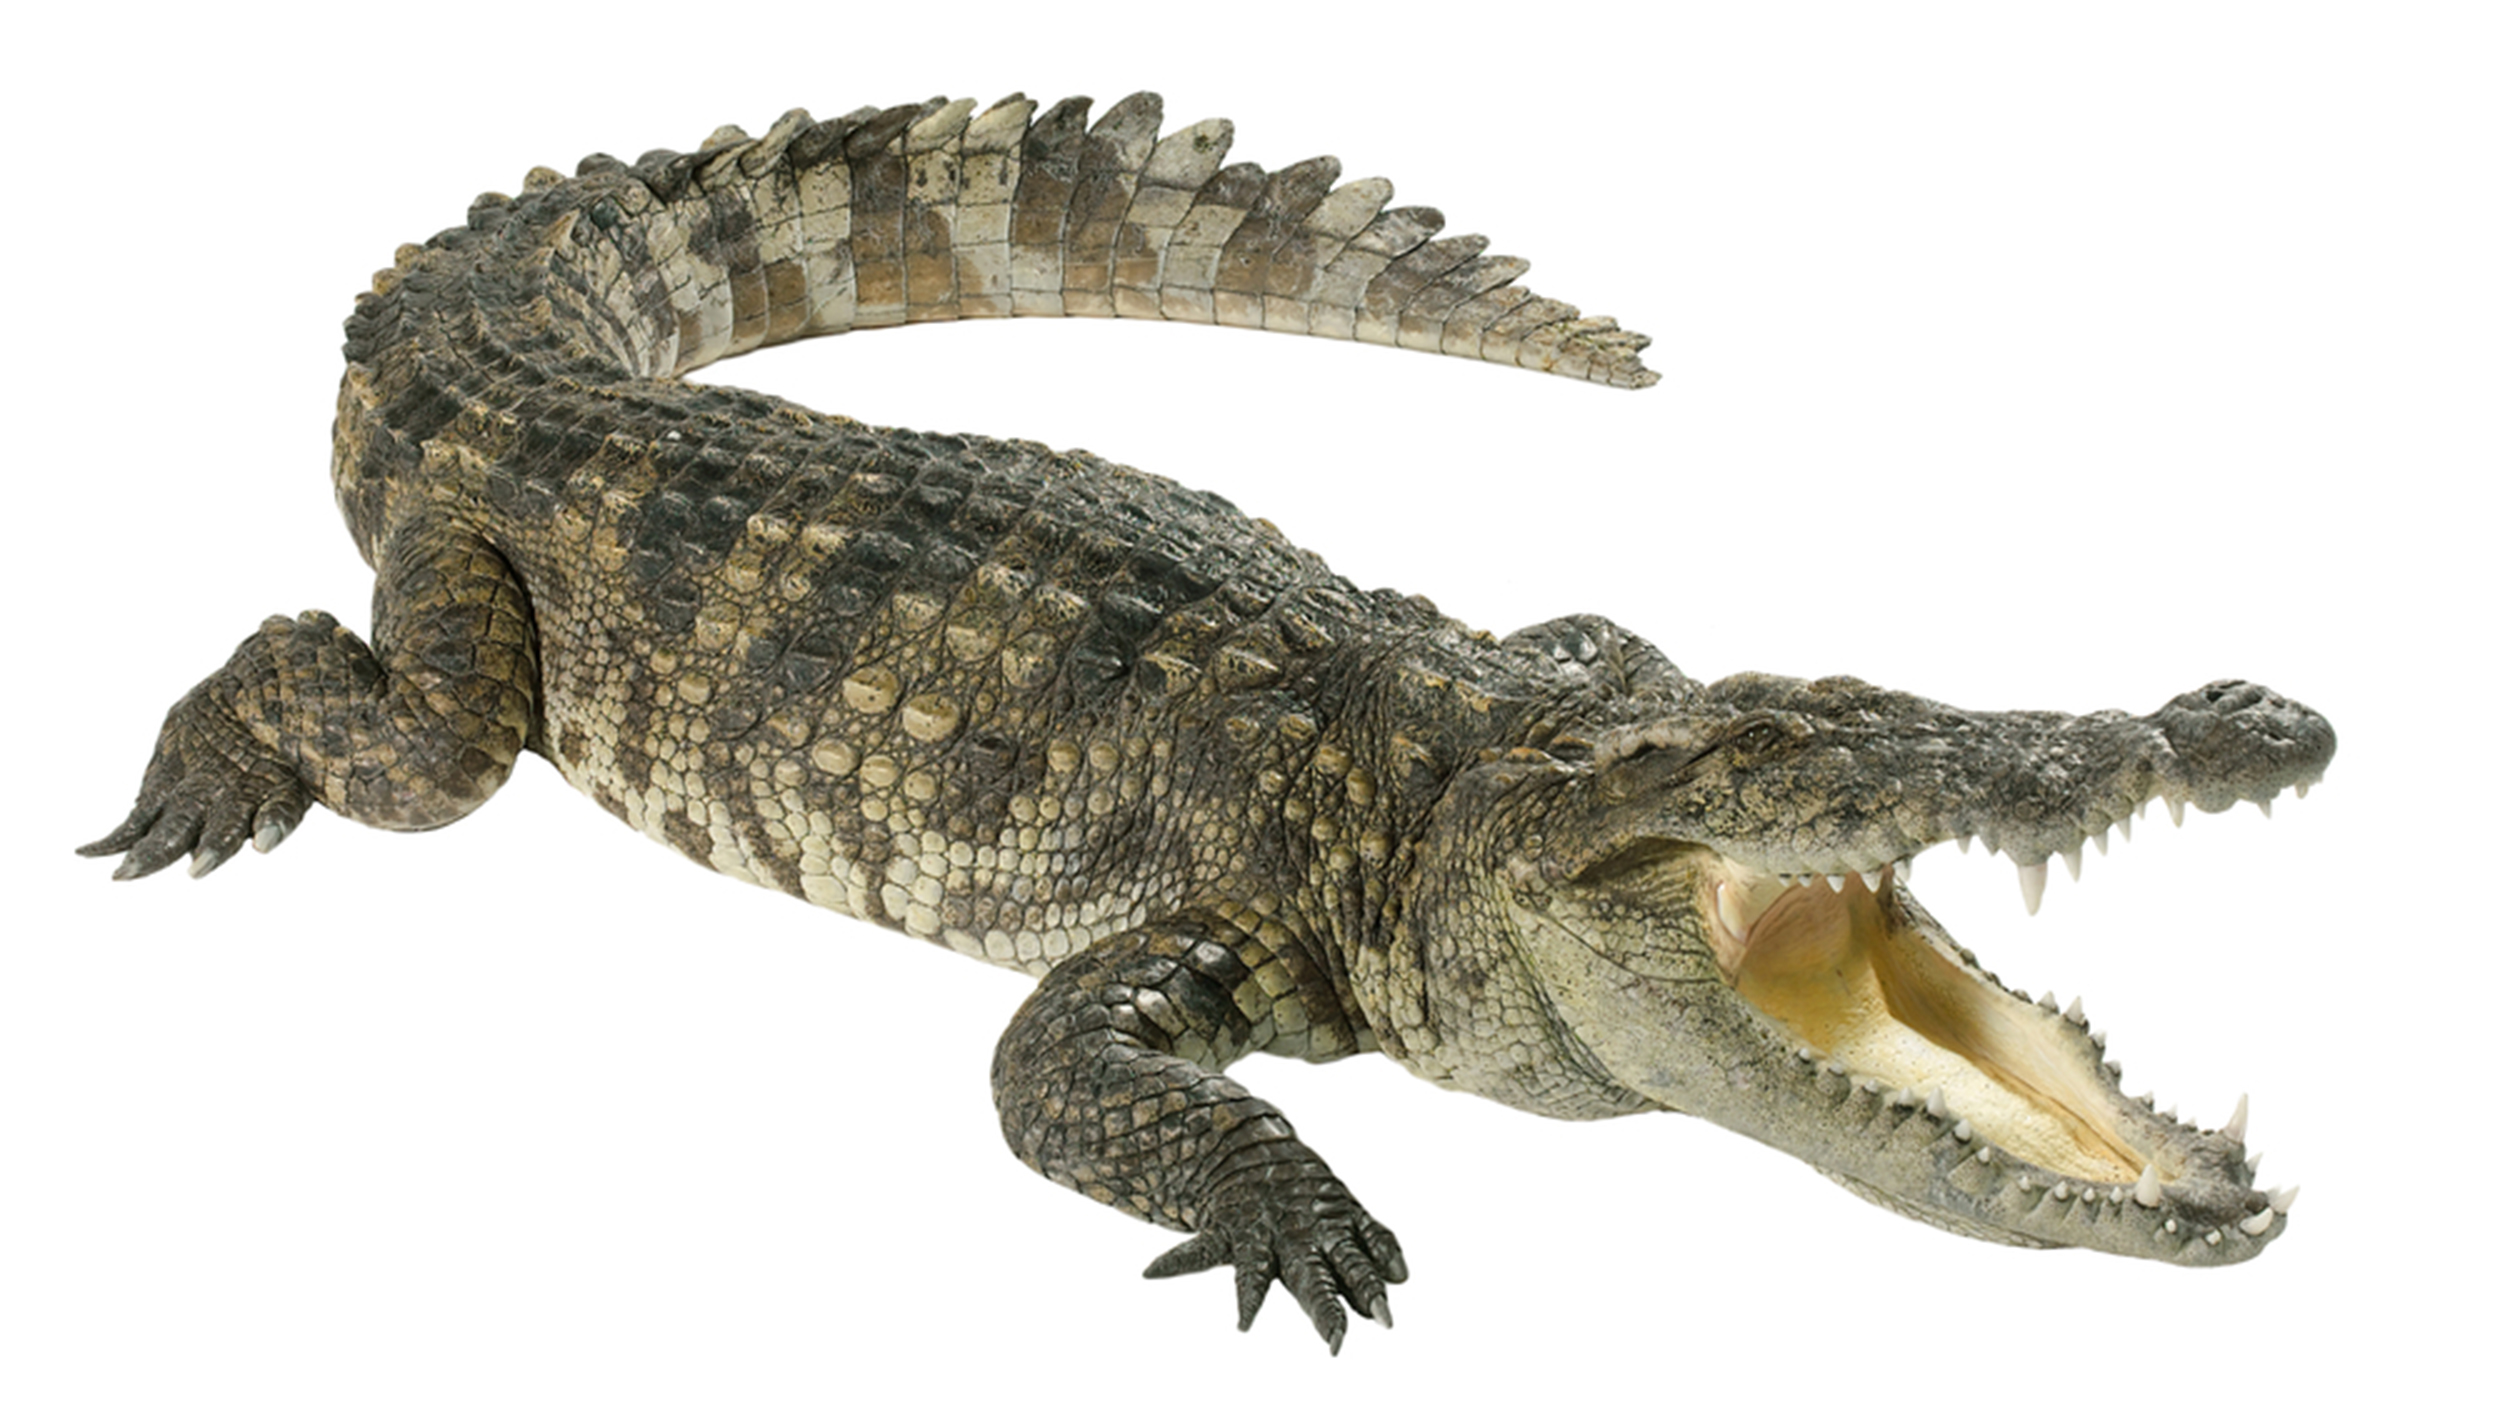 Wildlife crocodile open mouth isolated on white background; Shutterstock ID 73252057; PO: david-today